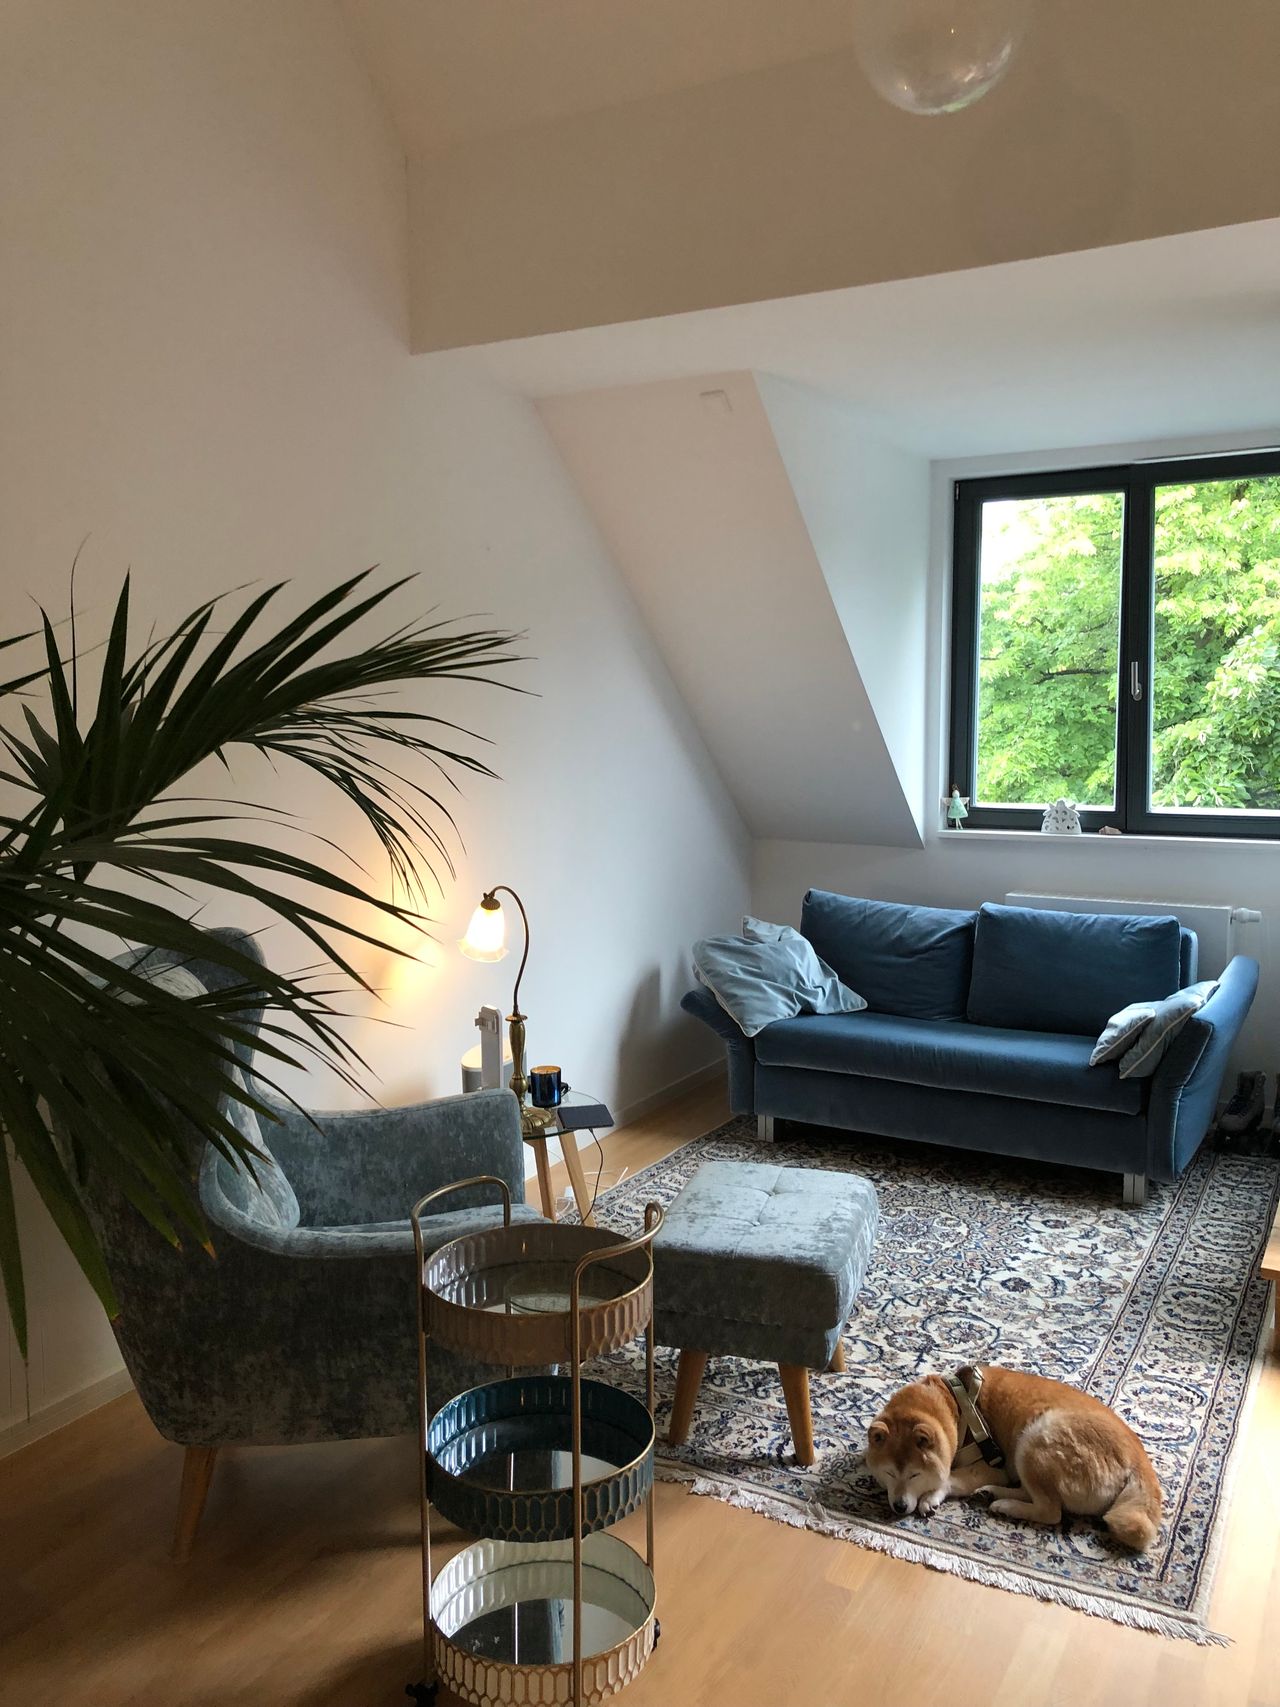 Fashionable, fantastic home located in Zehlendorf